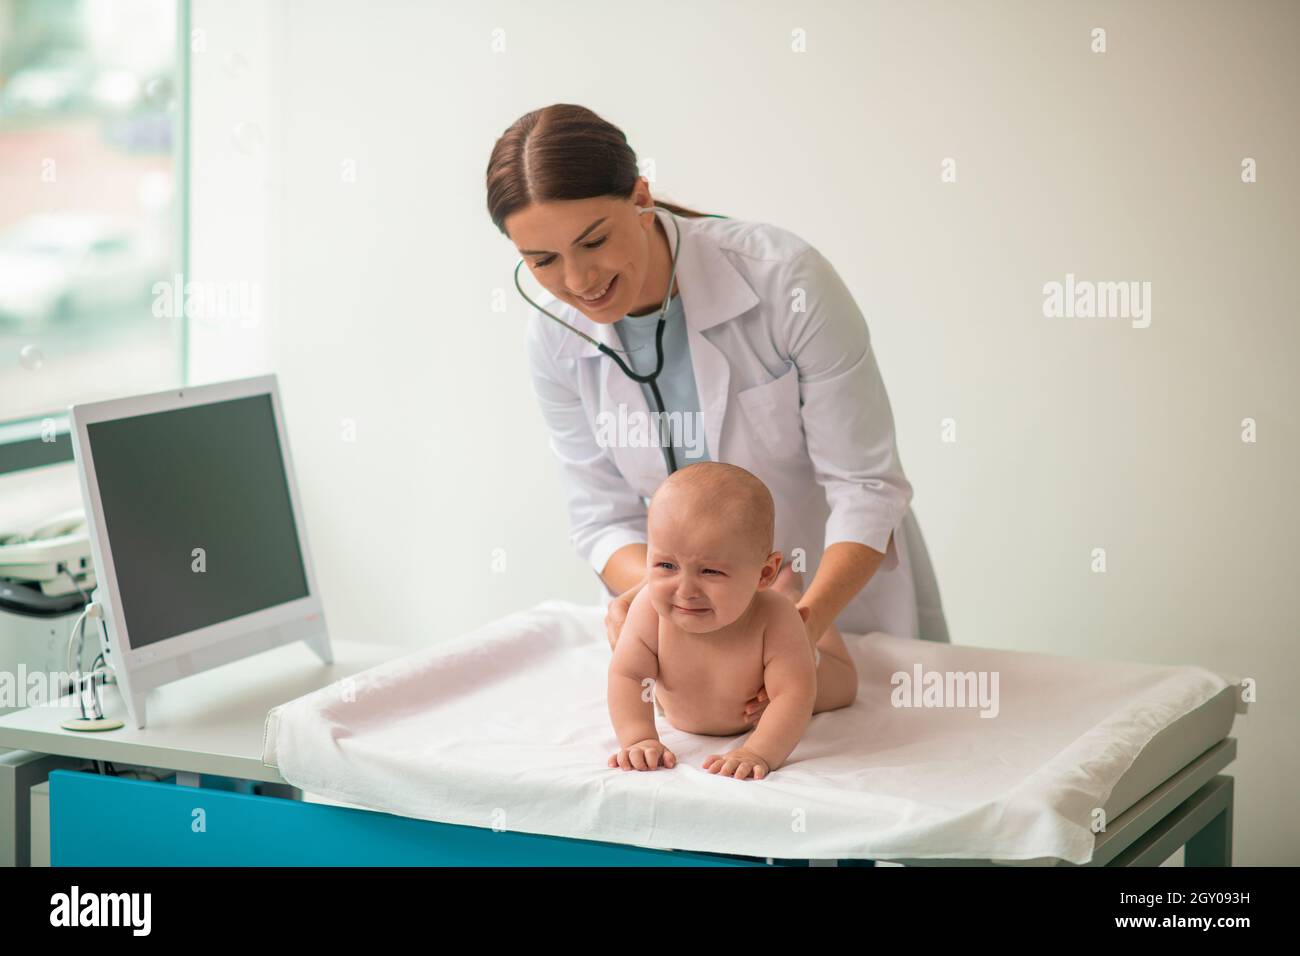 Experienced doctor examining an upset infant with a sterile stethoscope Stock Photo